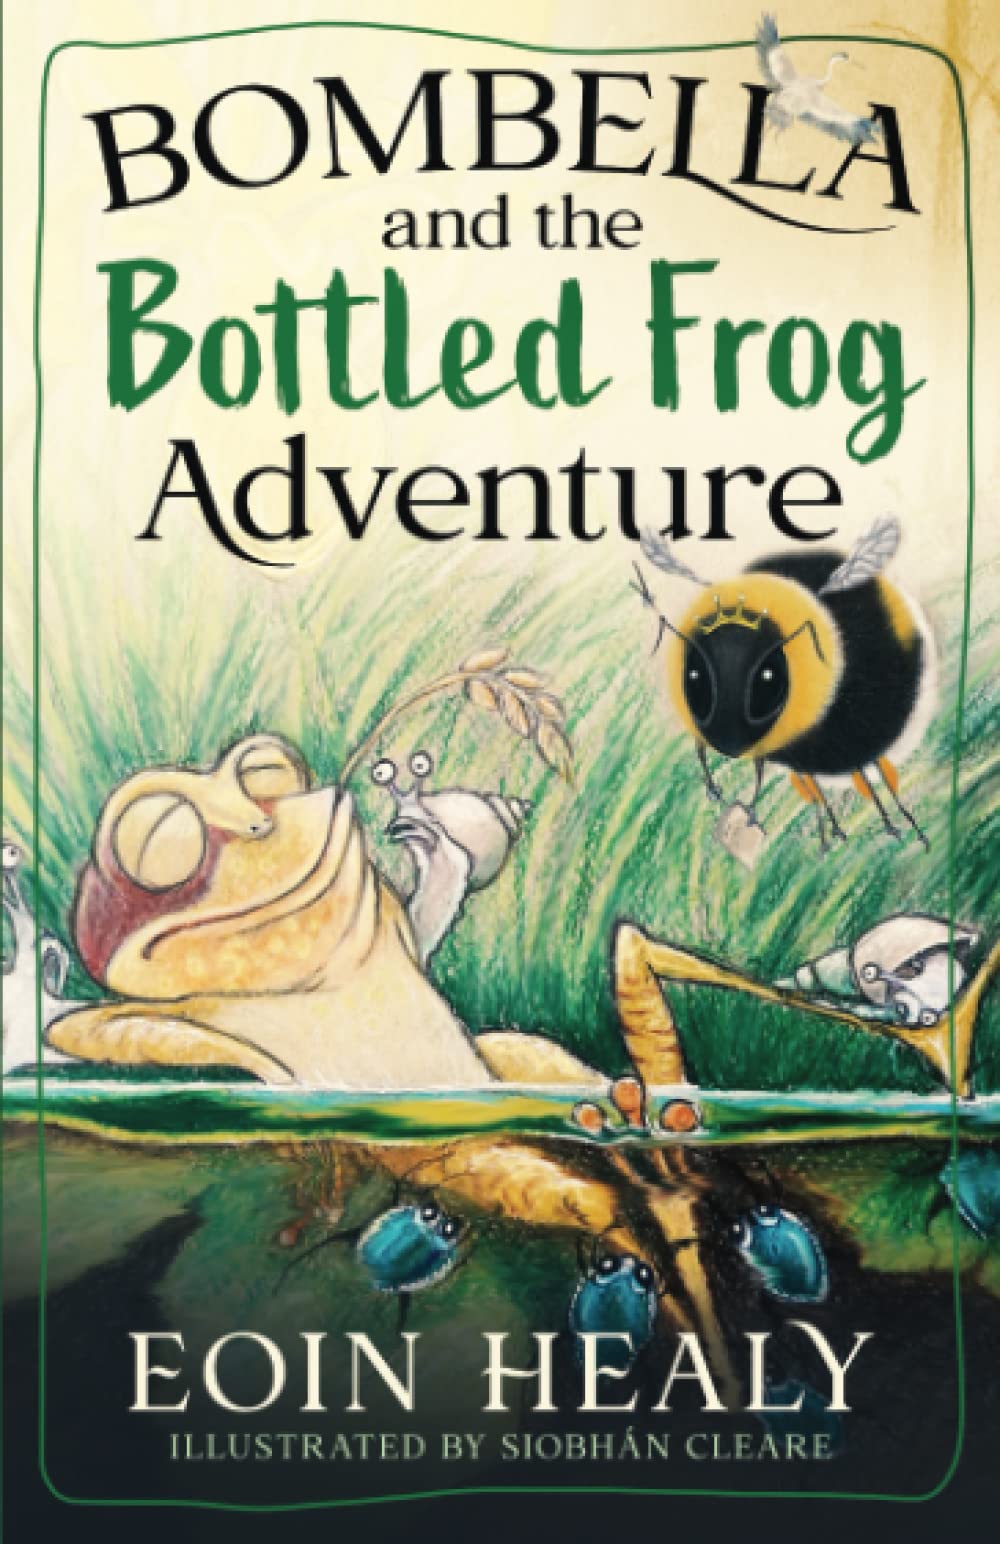 Bombella and the Bottled Frog Adventure by Eoin Healy